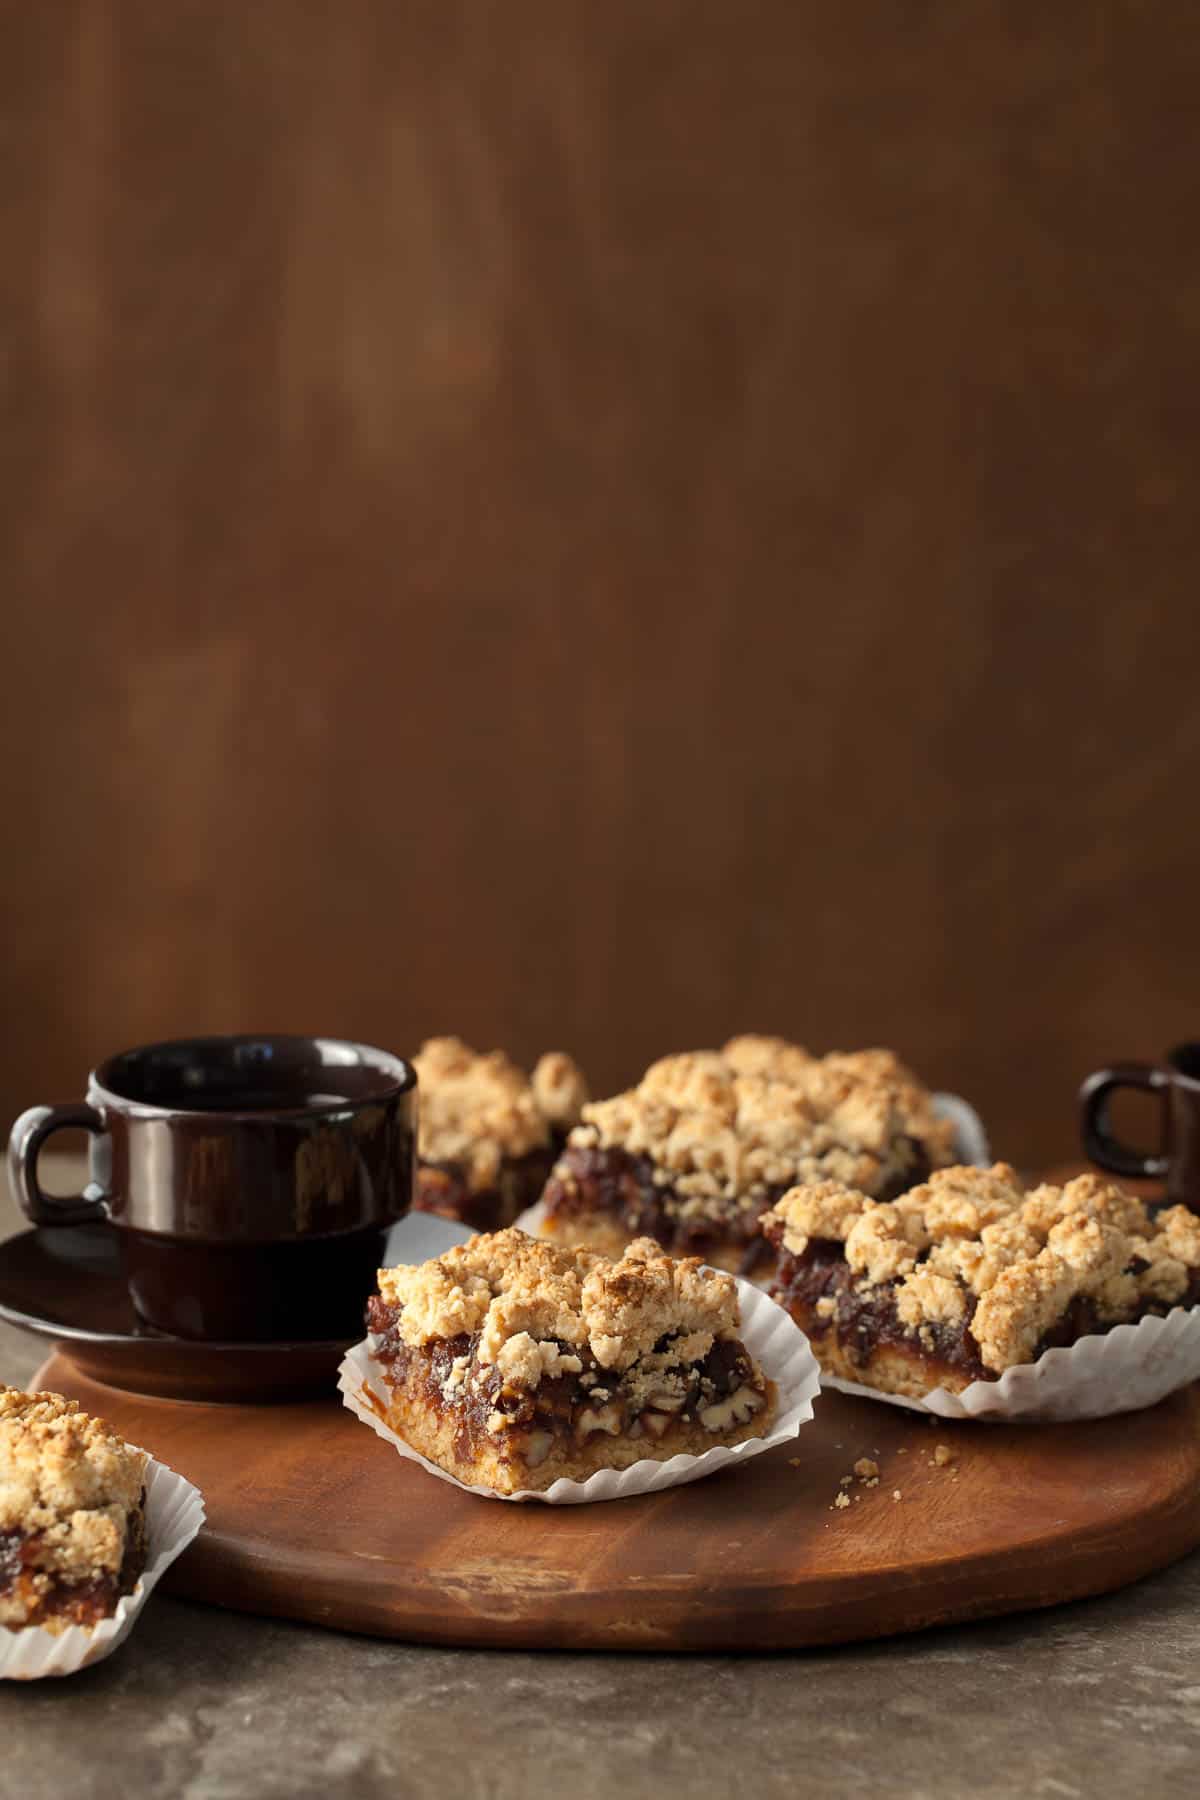  Gluten-Free Date Bars with Coffee Cups